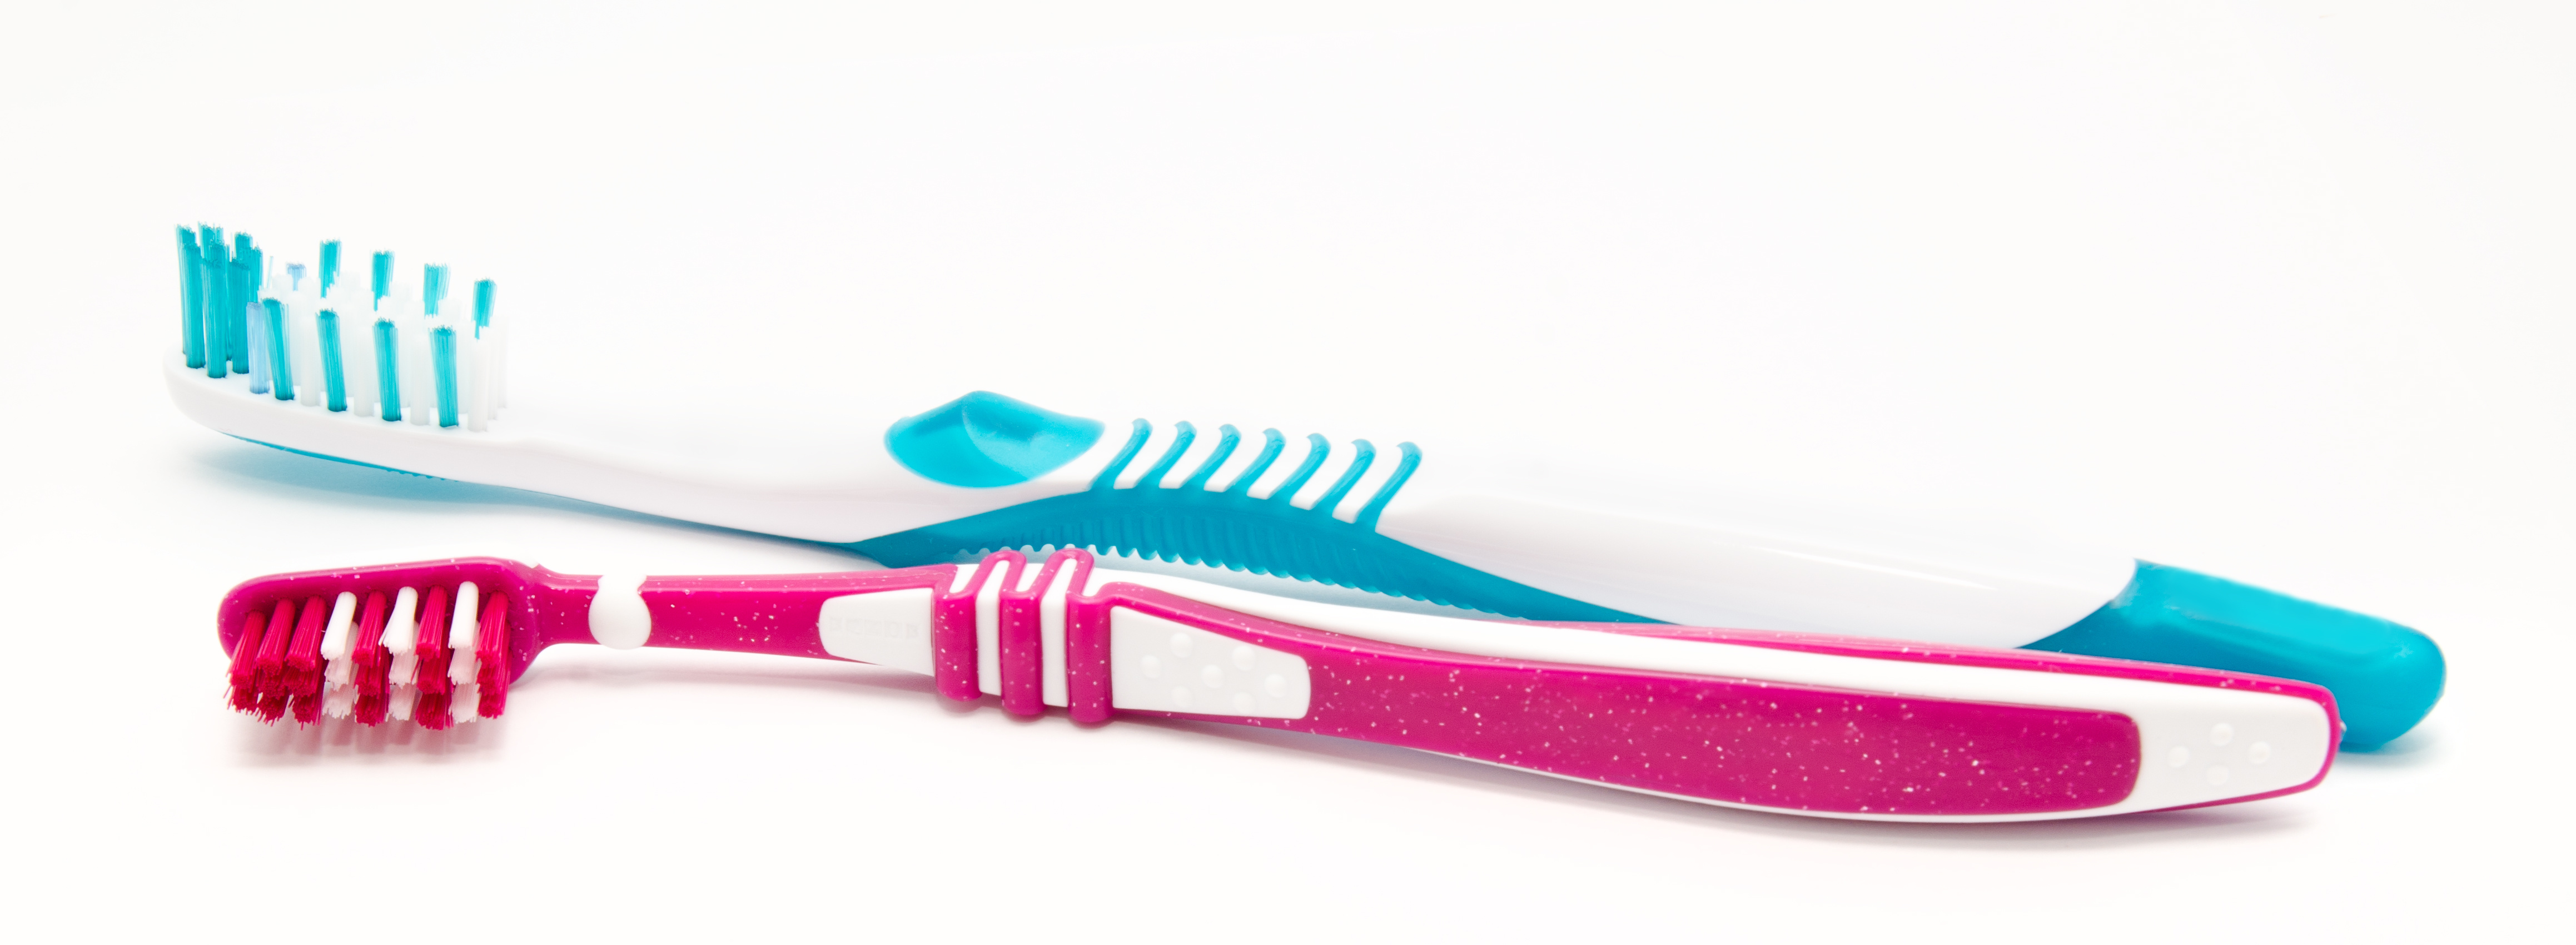 Over-molded Tooth Brushes